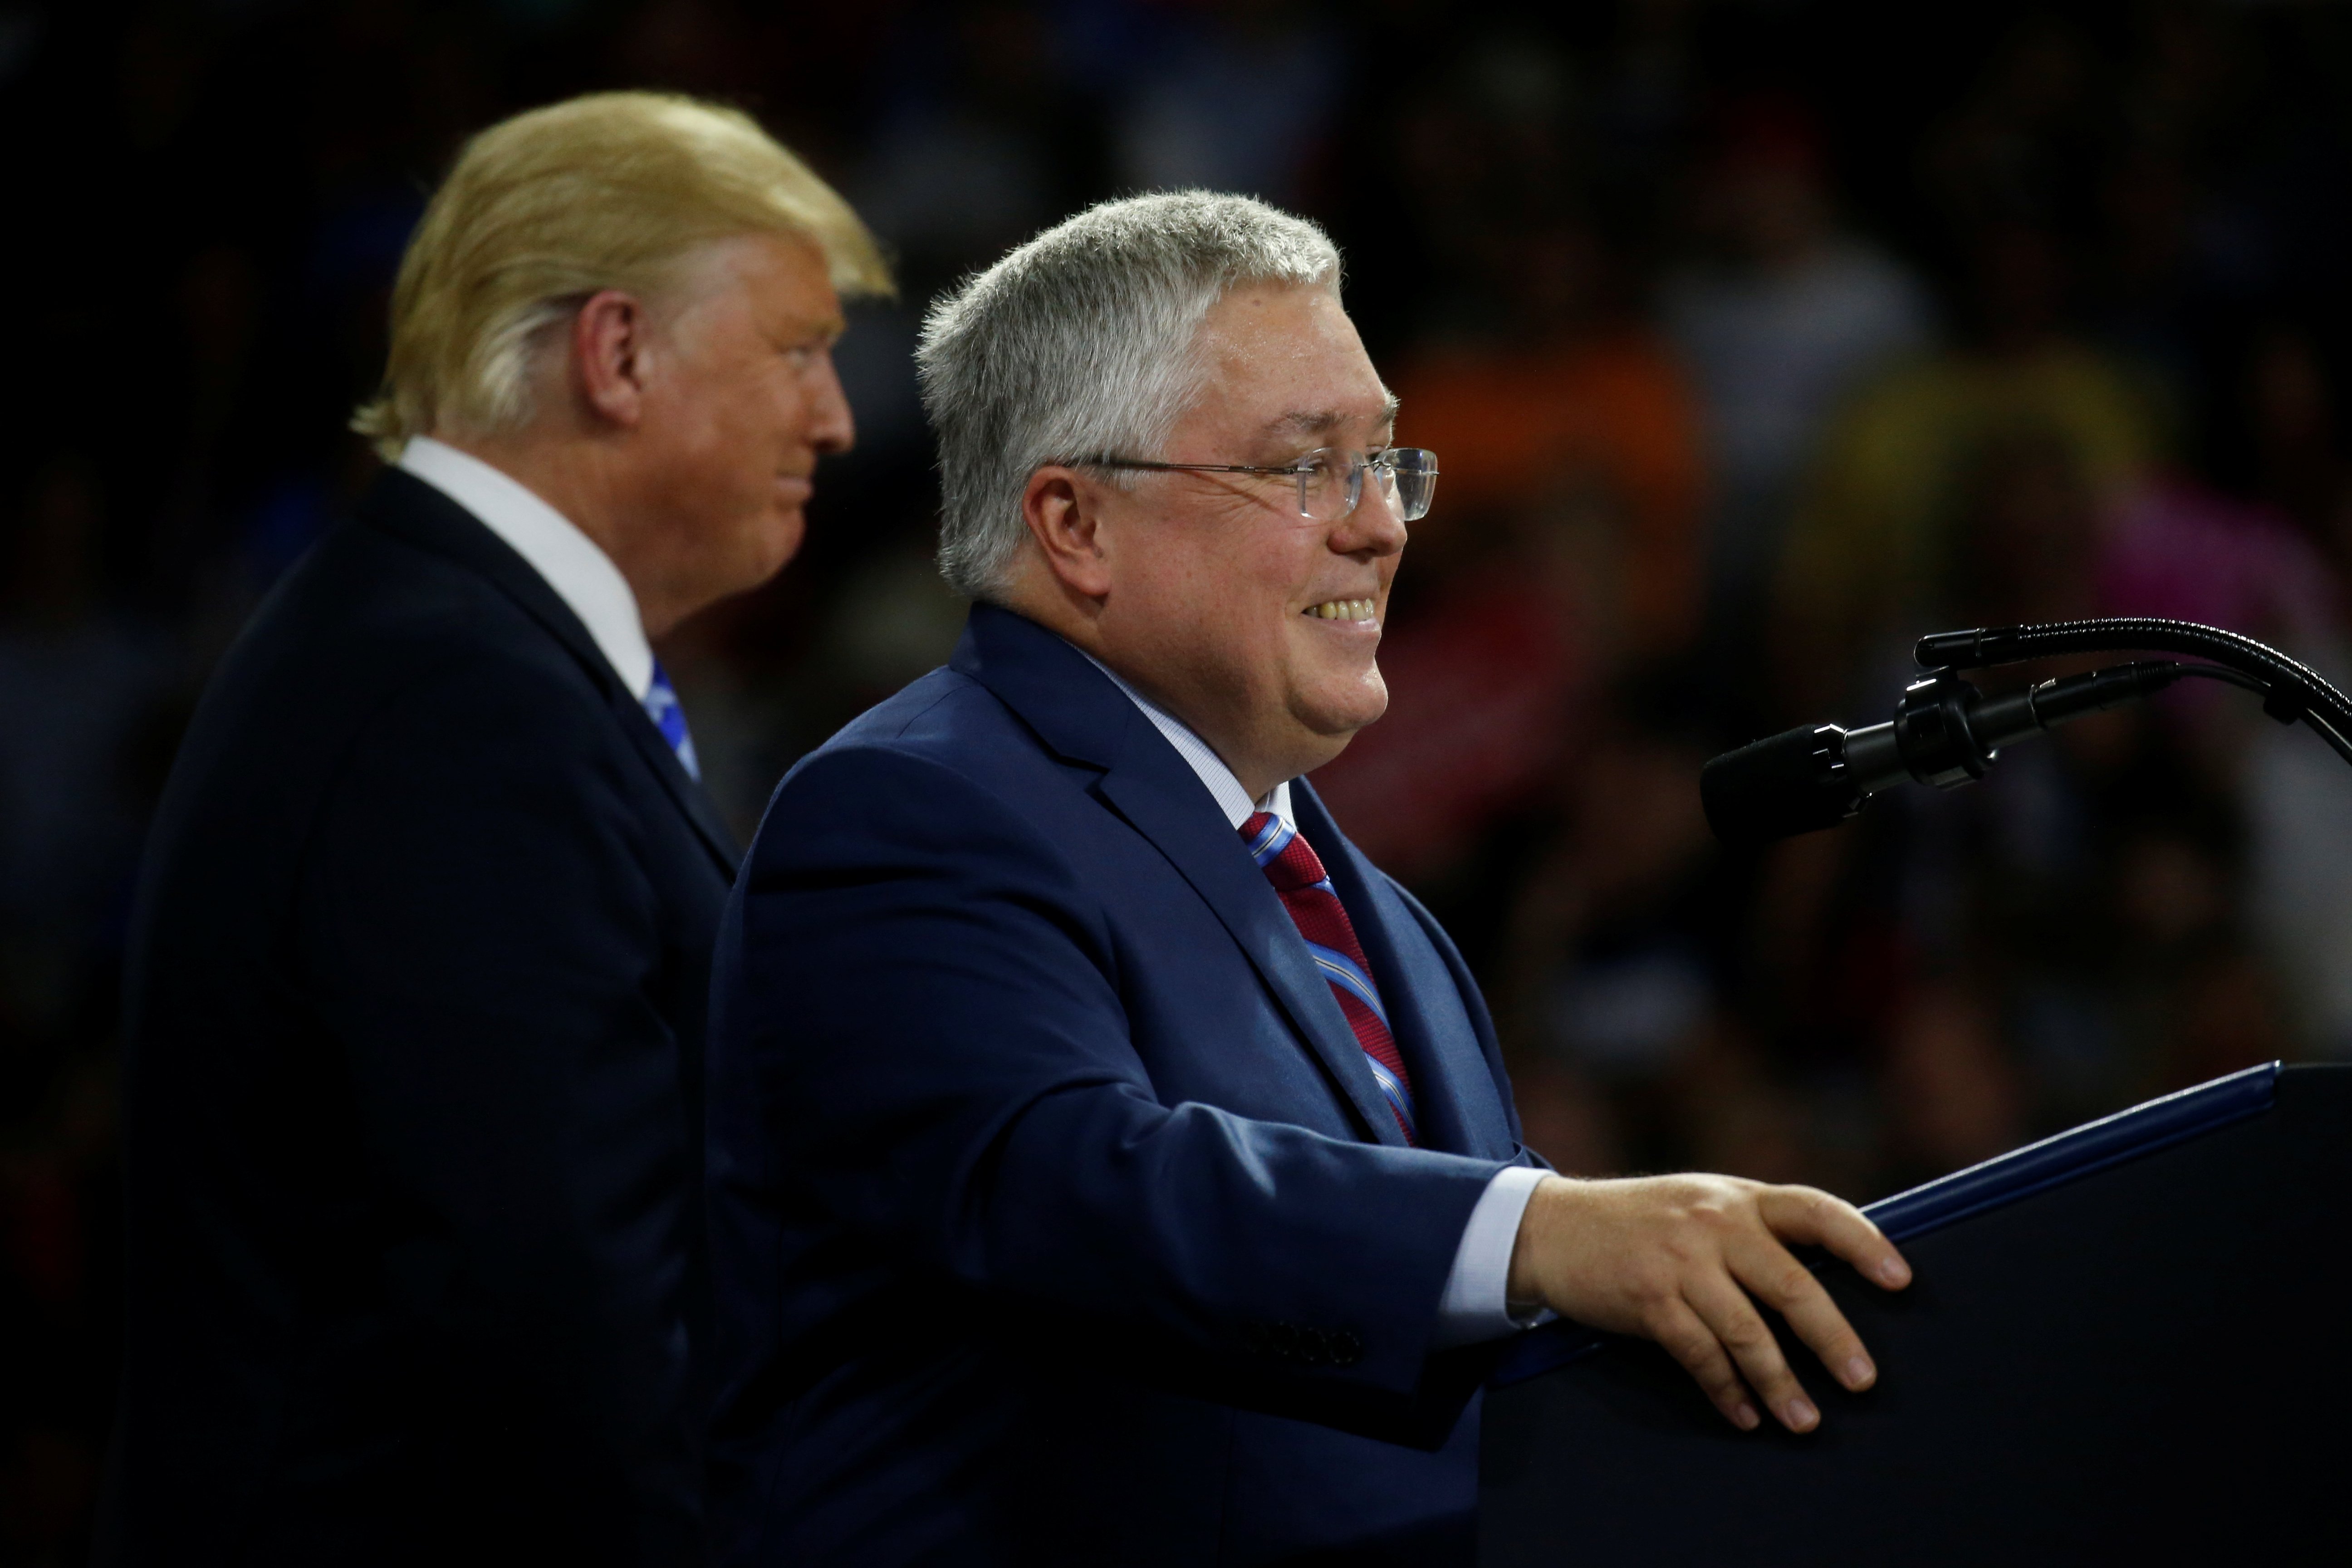 Patrick Morrisey, Attorney General of West Virginia speaks as U.S. President Donald Trump looks on at a Make America Great Again rally at the Civic Center in Charleston